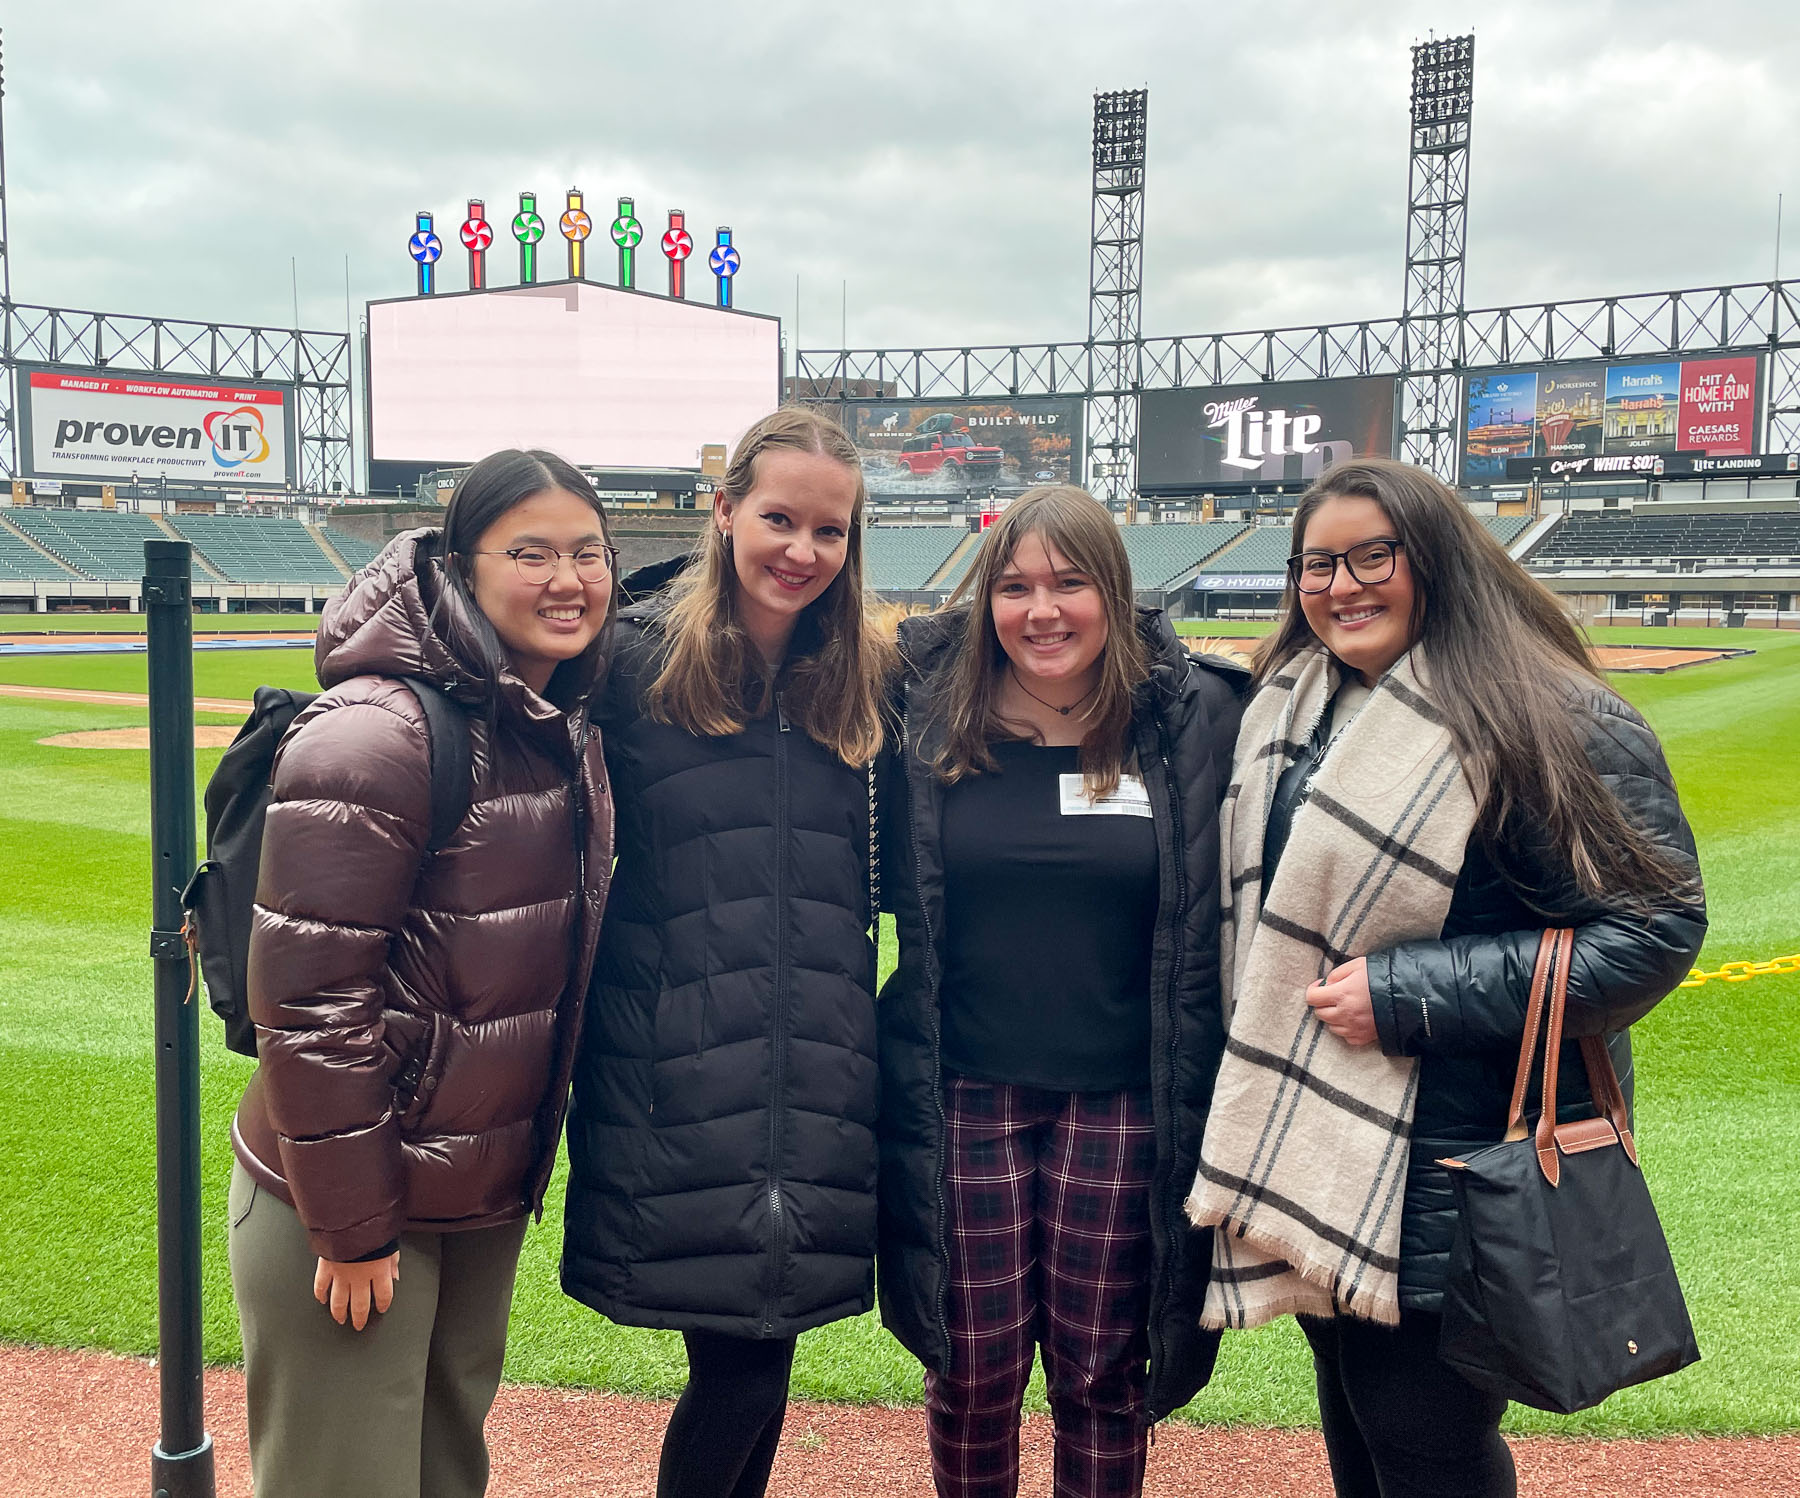 Later that day, the students toured the White Sox Guaranteed Rate Field and learned from department heads.